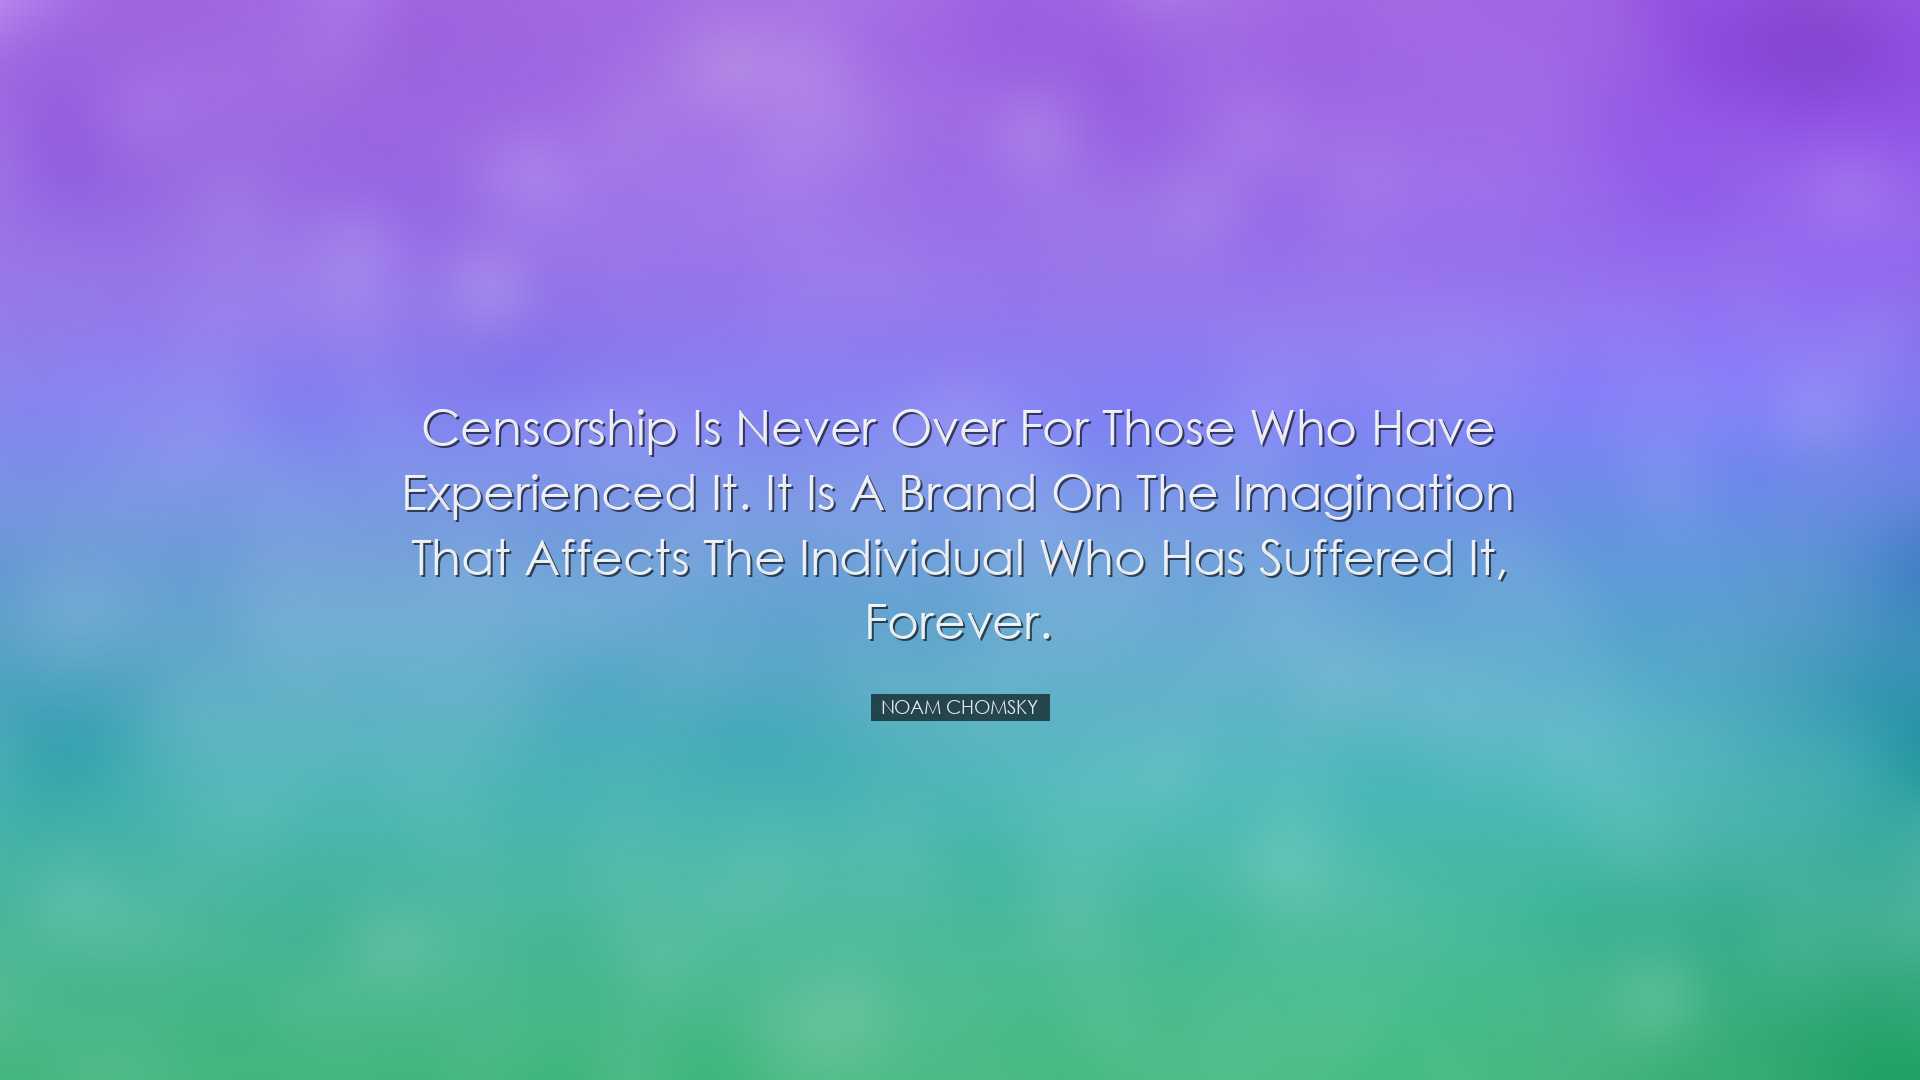 Censorship is never over for those who have experienced it. It is